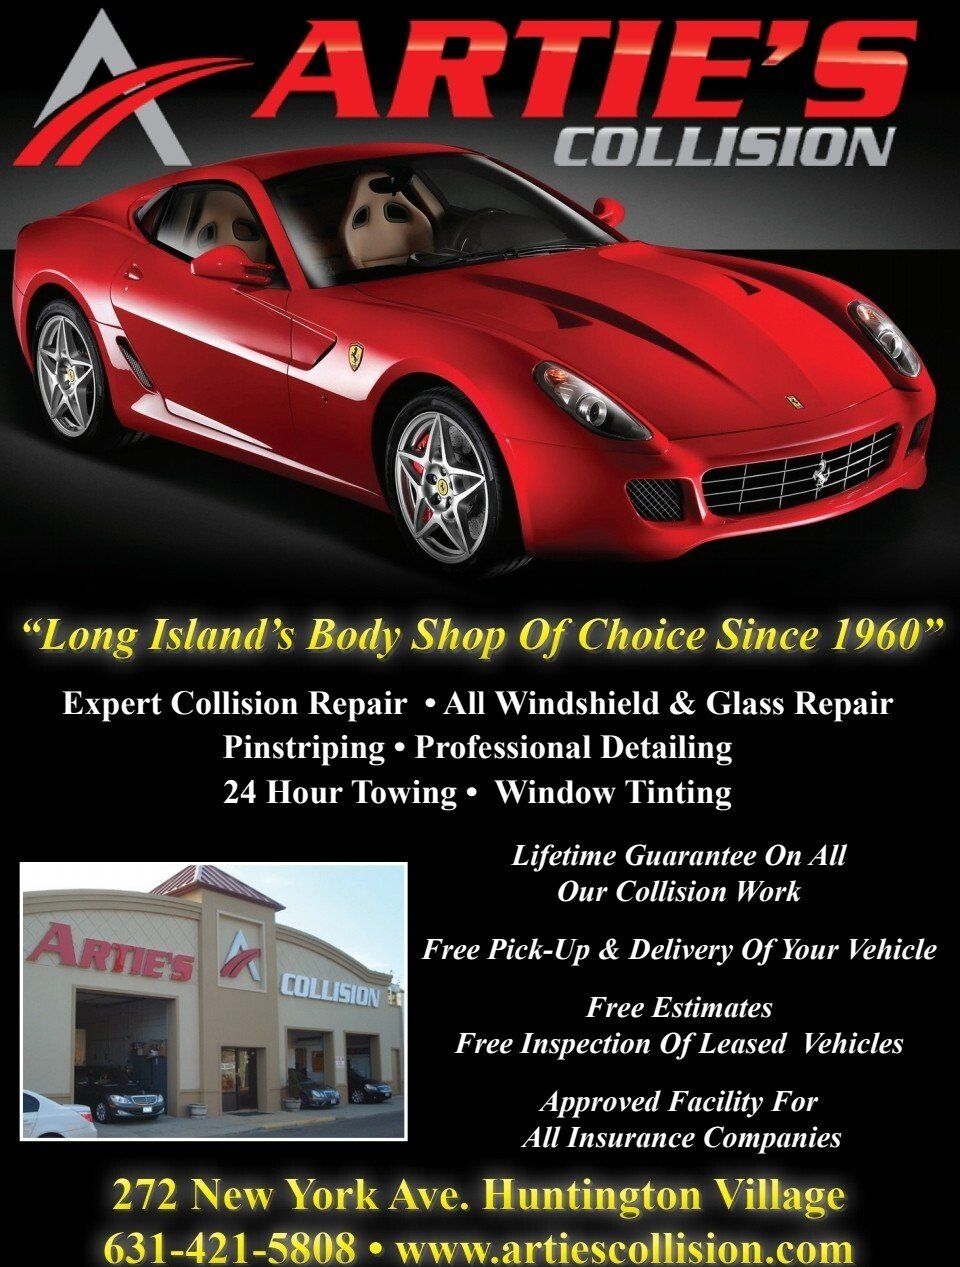 An advertisement for artie 's collision shows a red sports car